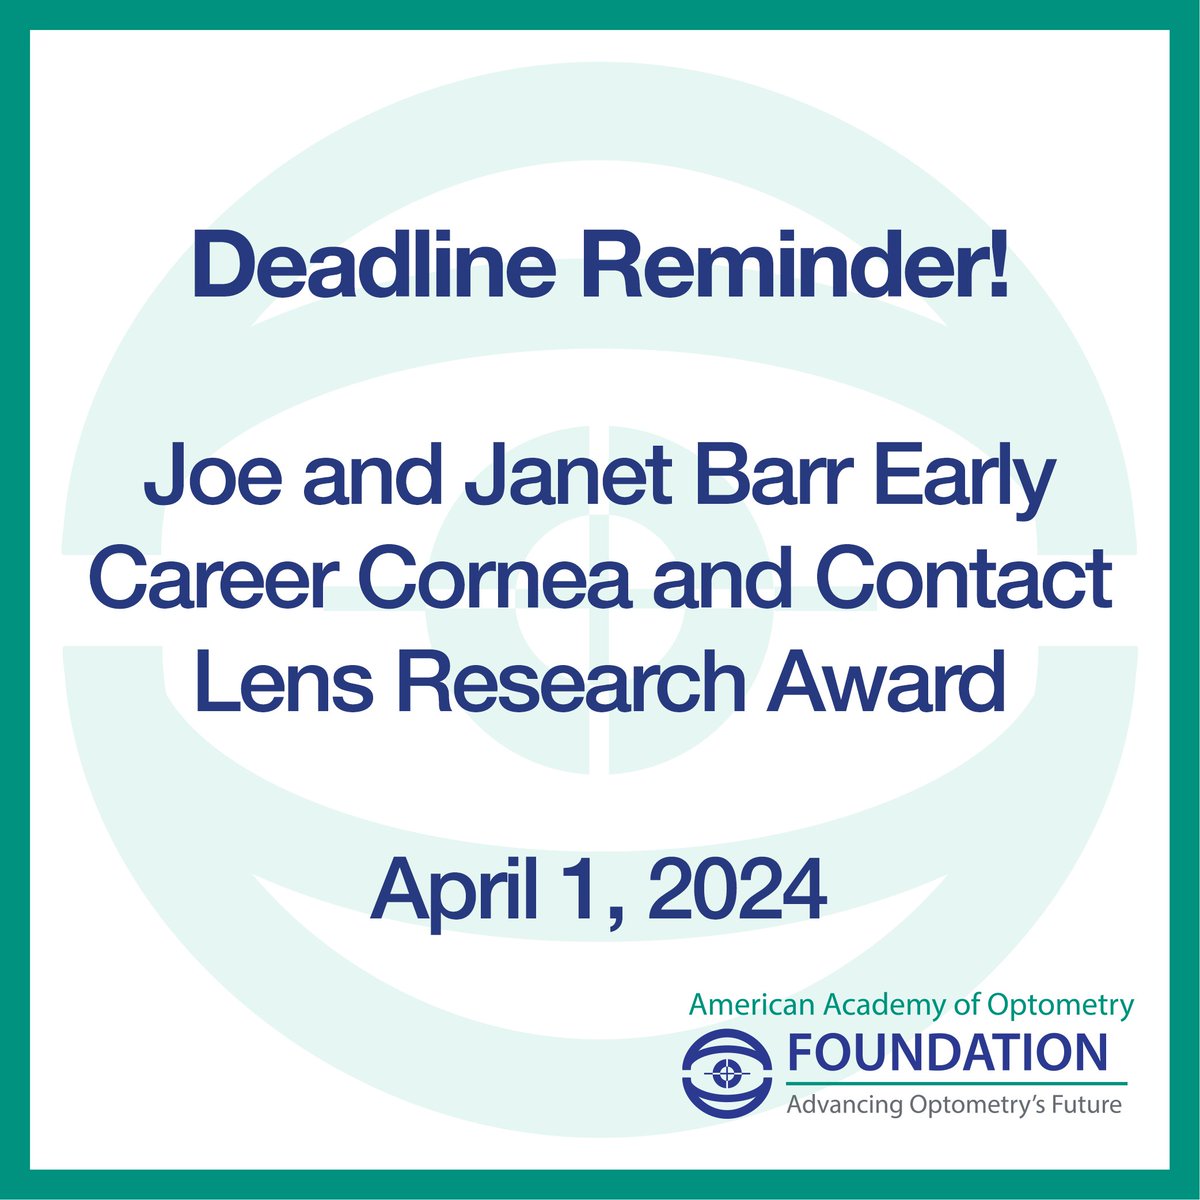 The deadline to submit your application is approaching. Get your applications in by April 1. Click here for information and to apply: bit.ly/3y1Sf33 #optometry #fellows